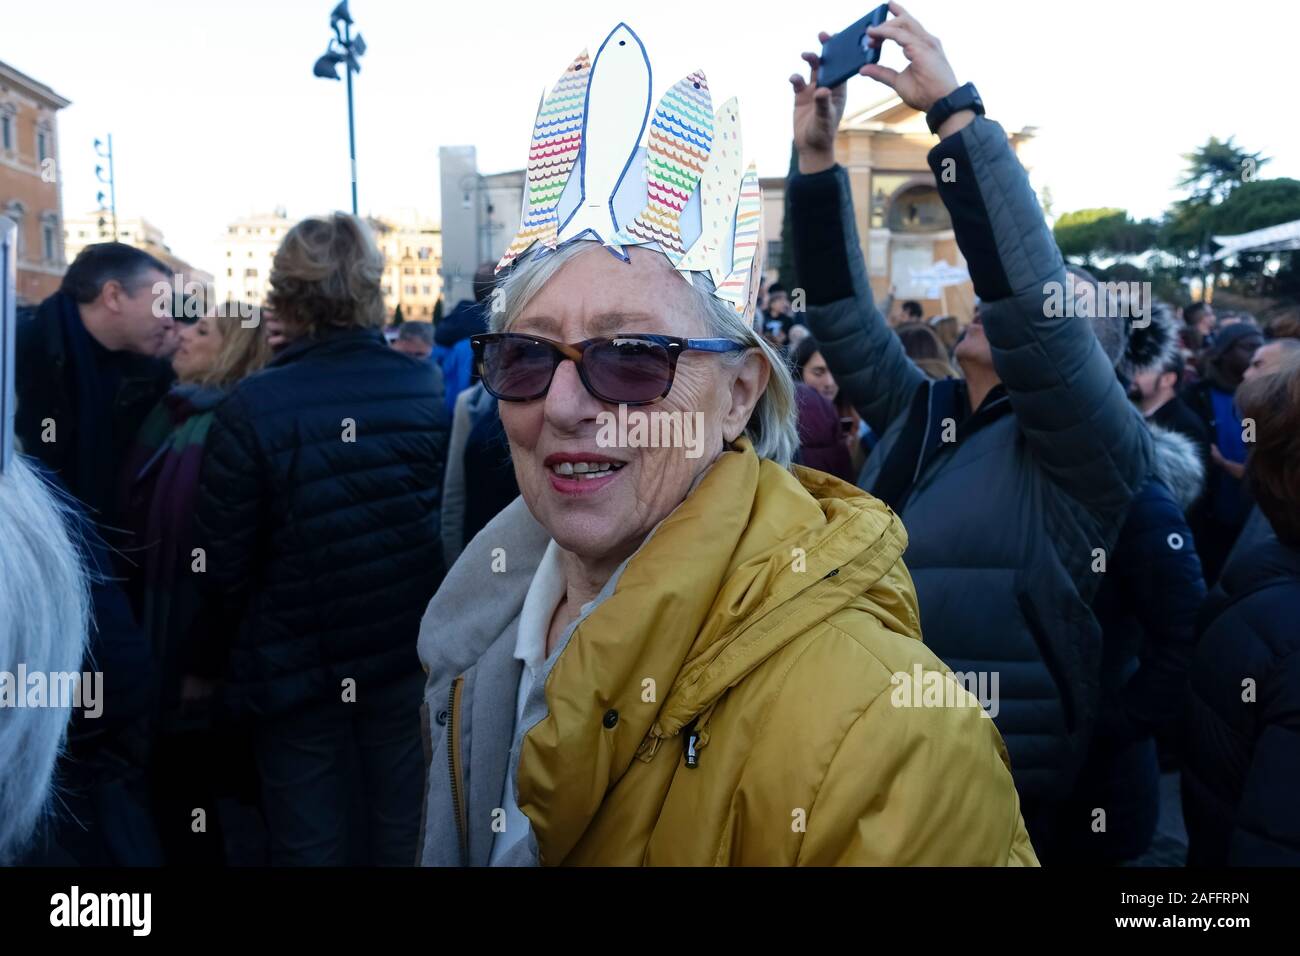 Rome, Italy. 14th Dec, 2019. Elderly woman attends the Global Sardine Day event. More than 40.000 supporters came to Saint John Square to show their support for “6000 Sardines”, an anti-populist left-wing movement, to express their opposition to populist forces. The spontaneous pacifist and antifascists movement is against the League Party and the far-right. Rome, Italy, Europe, EU. Stock Photo